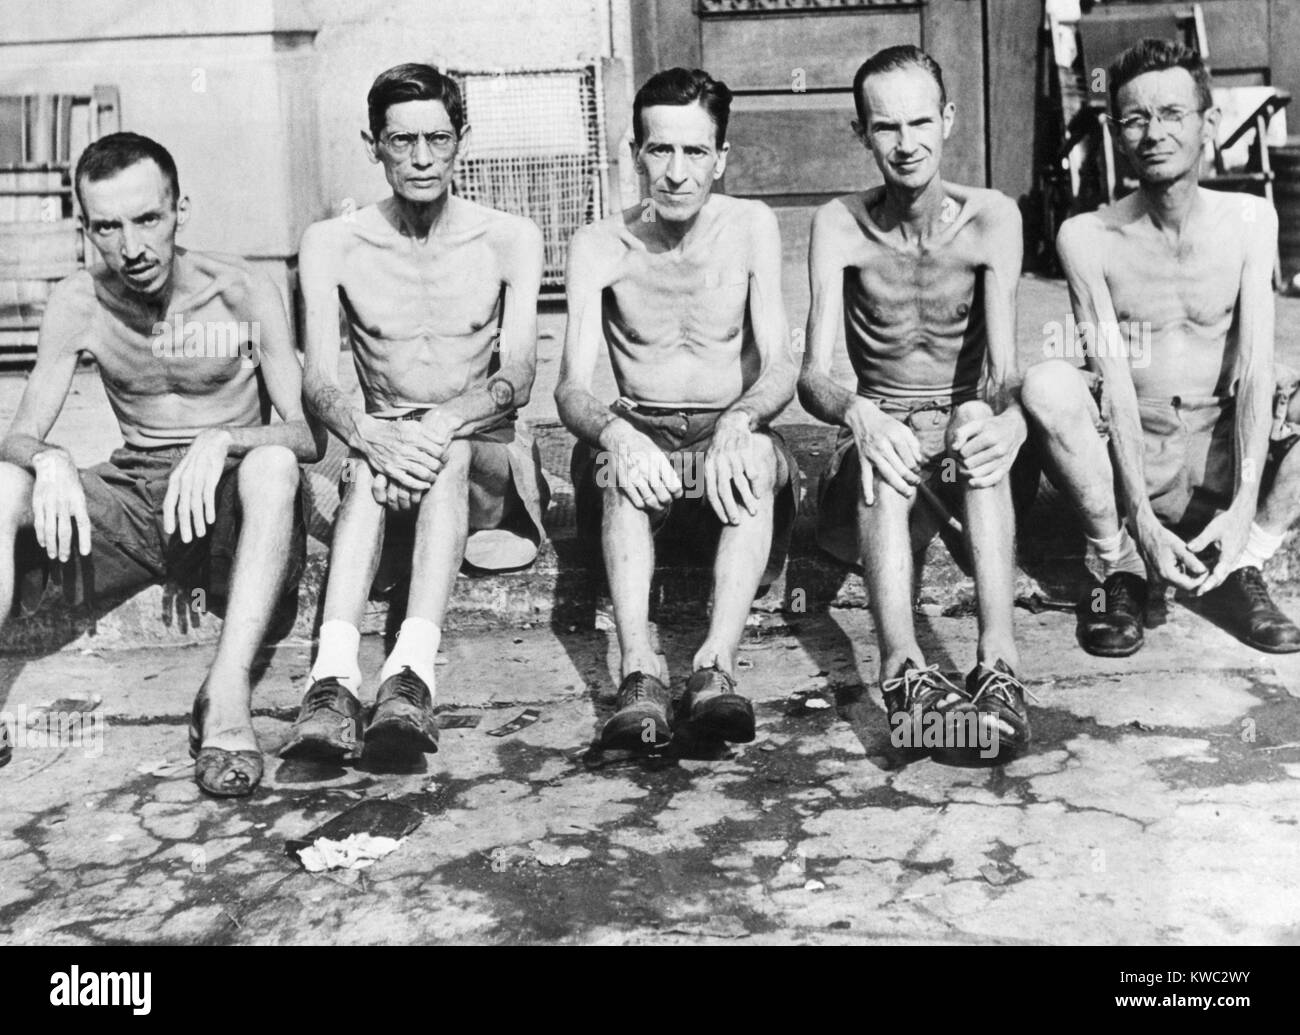 Five men liberated from the Santo Tomas internment camp in Manila, Feb. 23, 1945. L-R: Arehugo G. Winkler, 20, a proofreader on a Manila paper, entered camp weighing 135 pounds, and left at 87 pounds. Thomas B. Loft, Gen. Foods official, who came in at 160 and is now 102 pounds. Arthur Williamson, weighed 145 and is now 103 pounds. Harold Leney, once 185 and now 105 pounds, and David Norvell, who dropped from 135 to 90 pounds. World War 2 (BSLOC 2015 13 127) Stock Photo